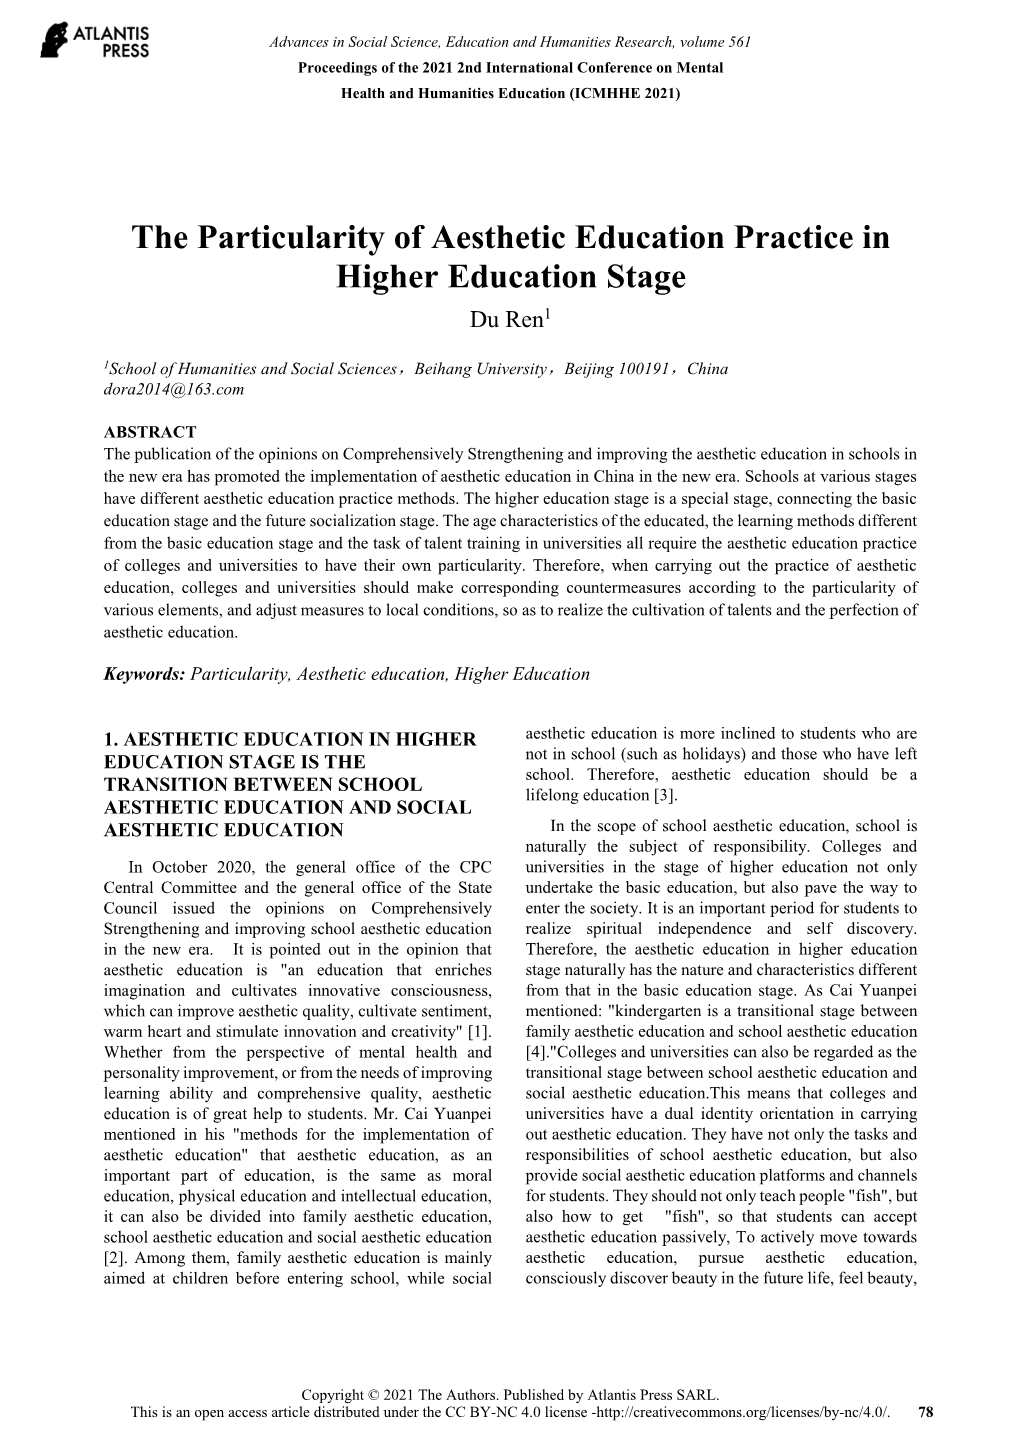 The Particularity of Aesthetic Education Practice in Higher Education Stage Du Ren1